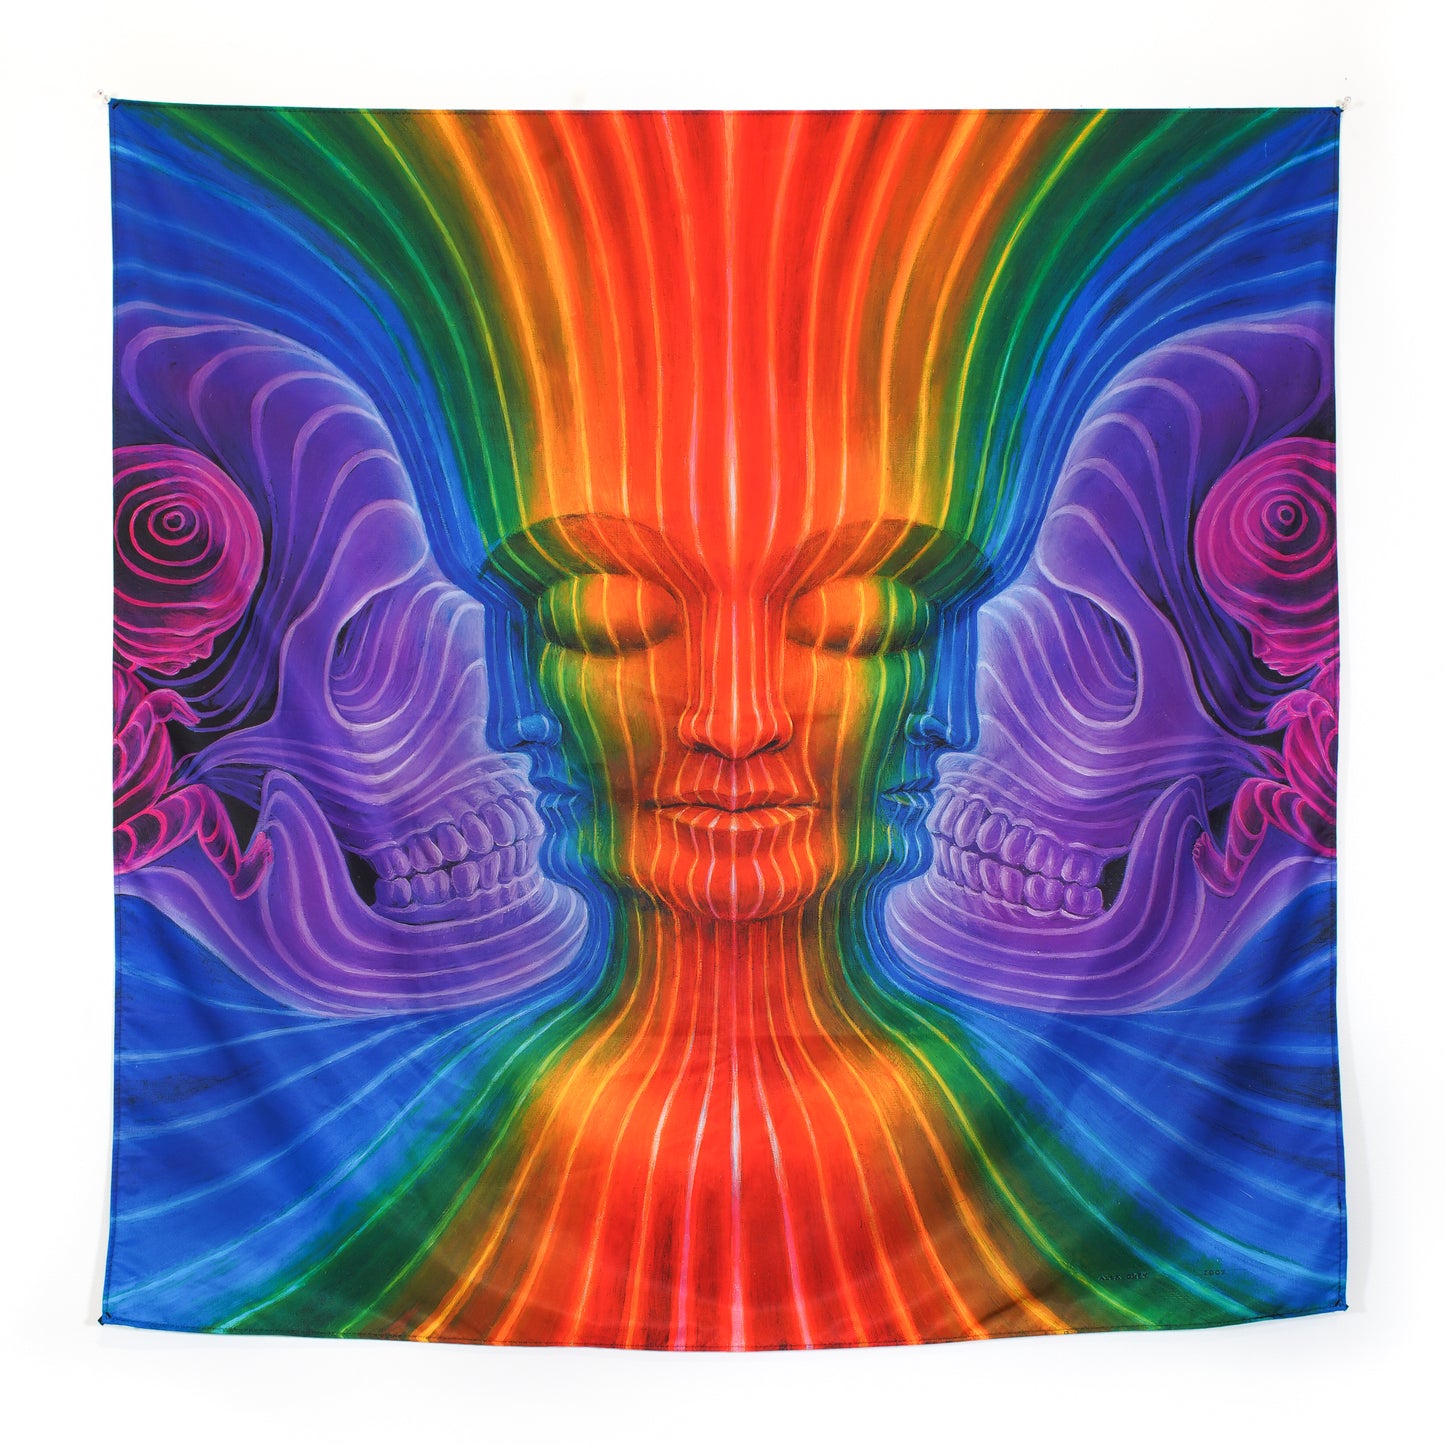 Interbeing - Tapestry – CoSM Shop